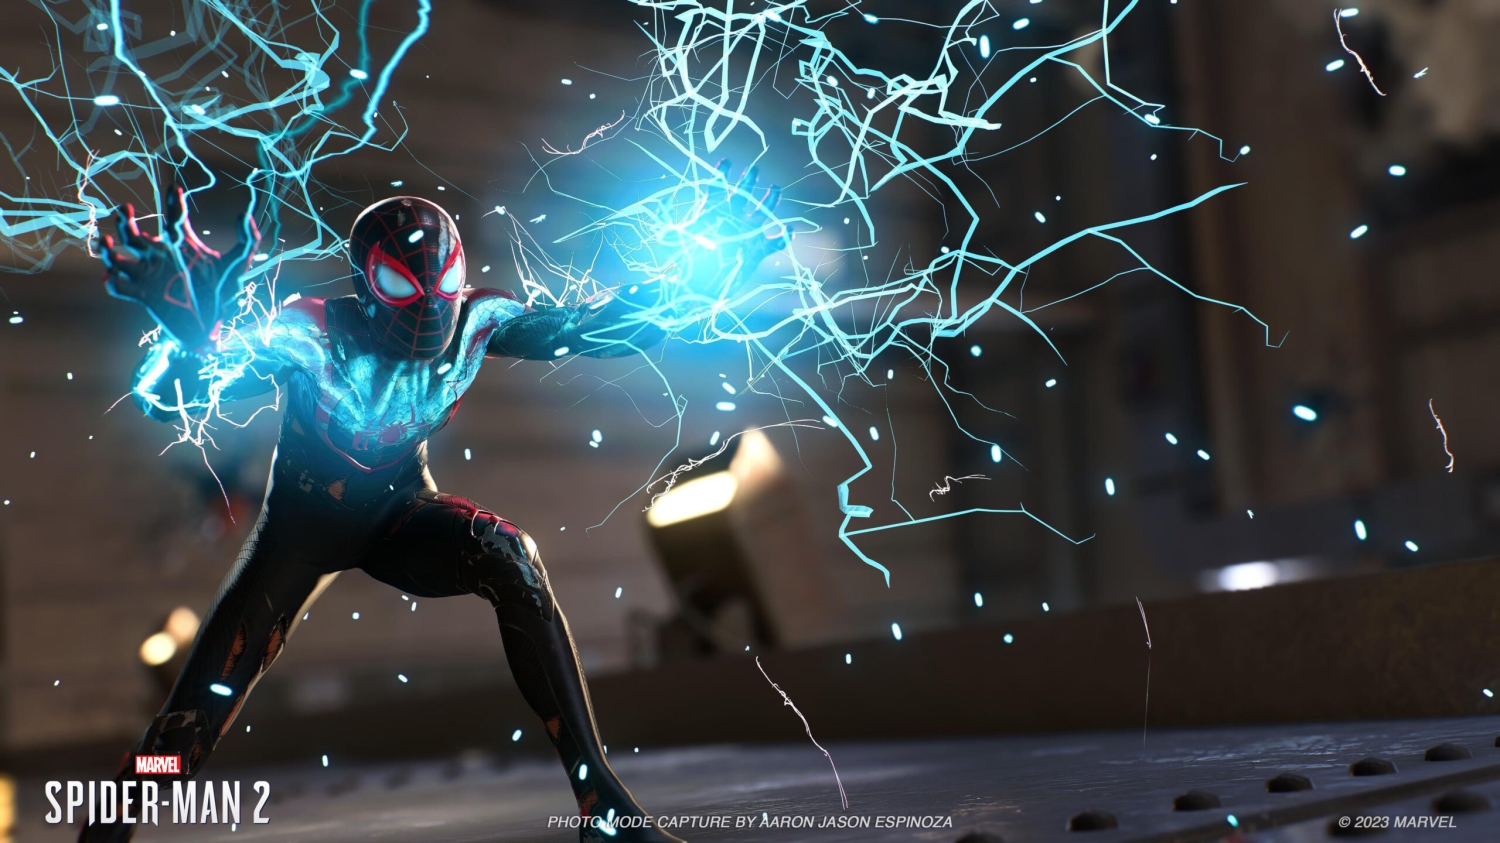 Marvel's Spider-Man 2 sells over 5 million copies in 11 days